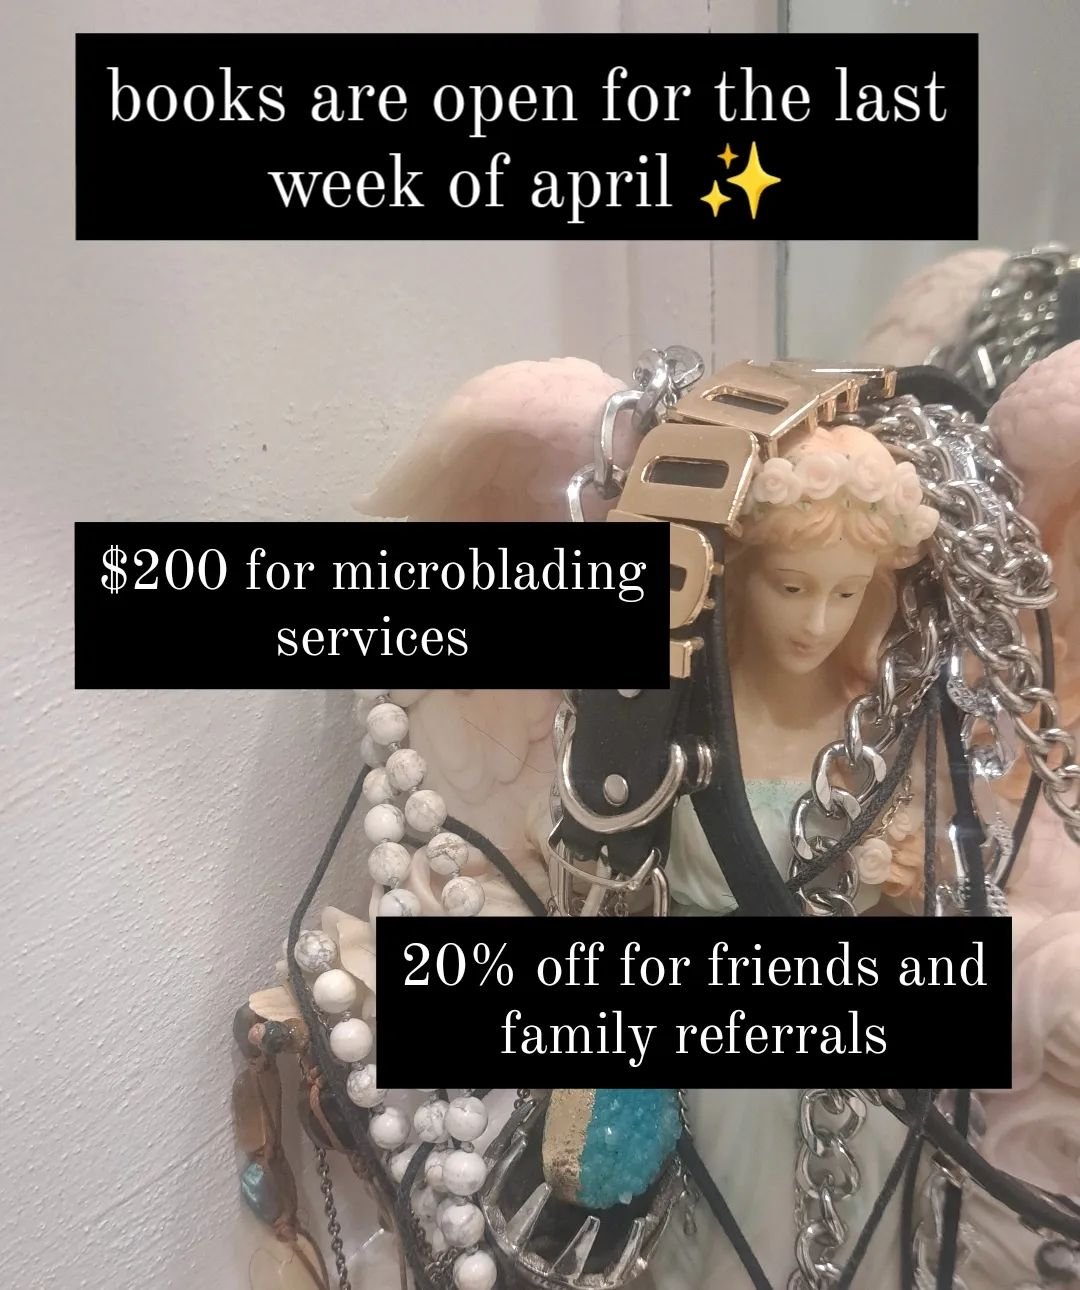 It's better to plan ahead for your permanant makeup well in advance before vacations or travel  to avoid unwanted fading during the healing process while on vacations and or traveling. 

DM me to schedule a consultstion for april! ✨️

#tattoo #brows 